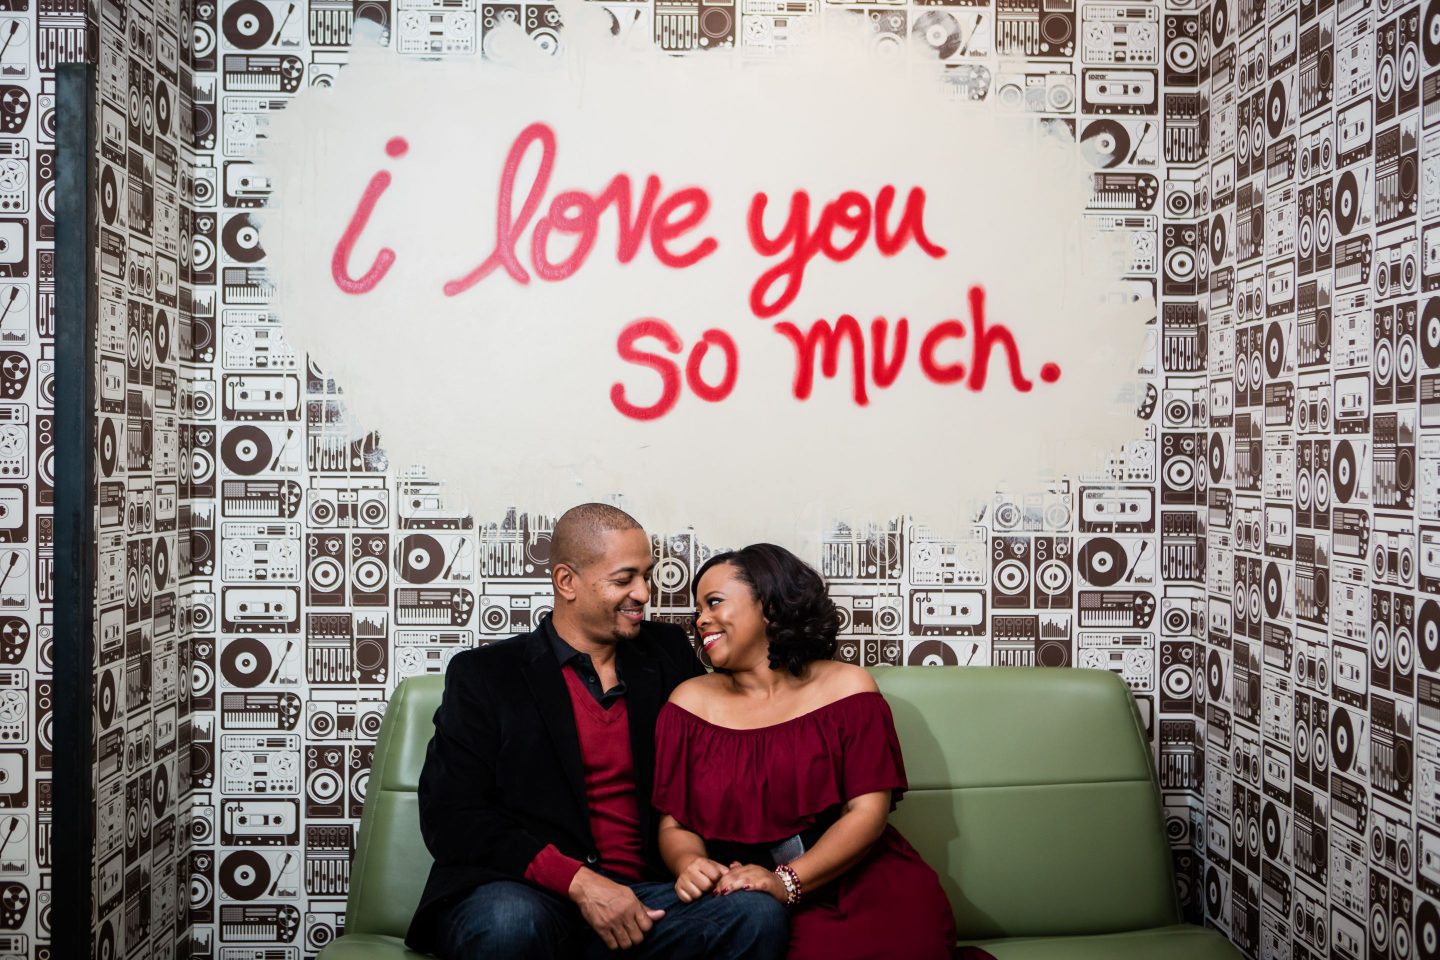 Black Owned Date Night Company Gives Tips on 3 Unique Date Night Experiences